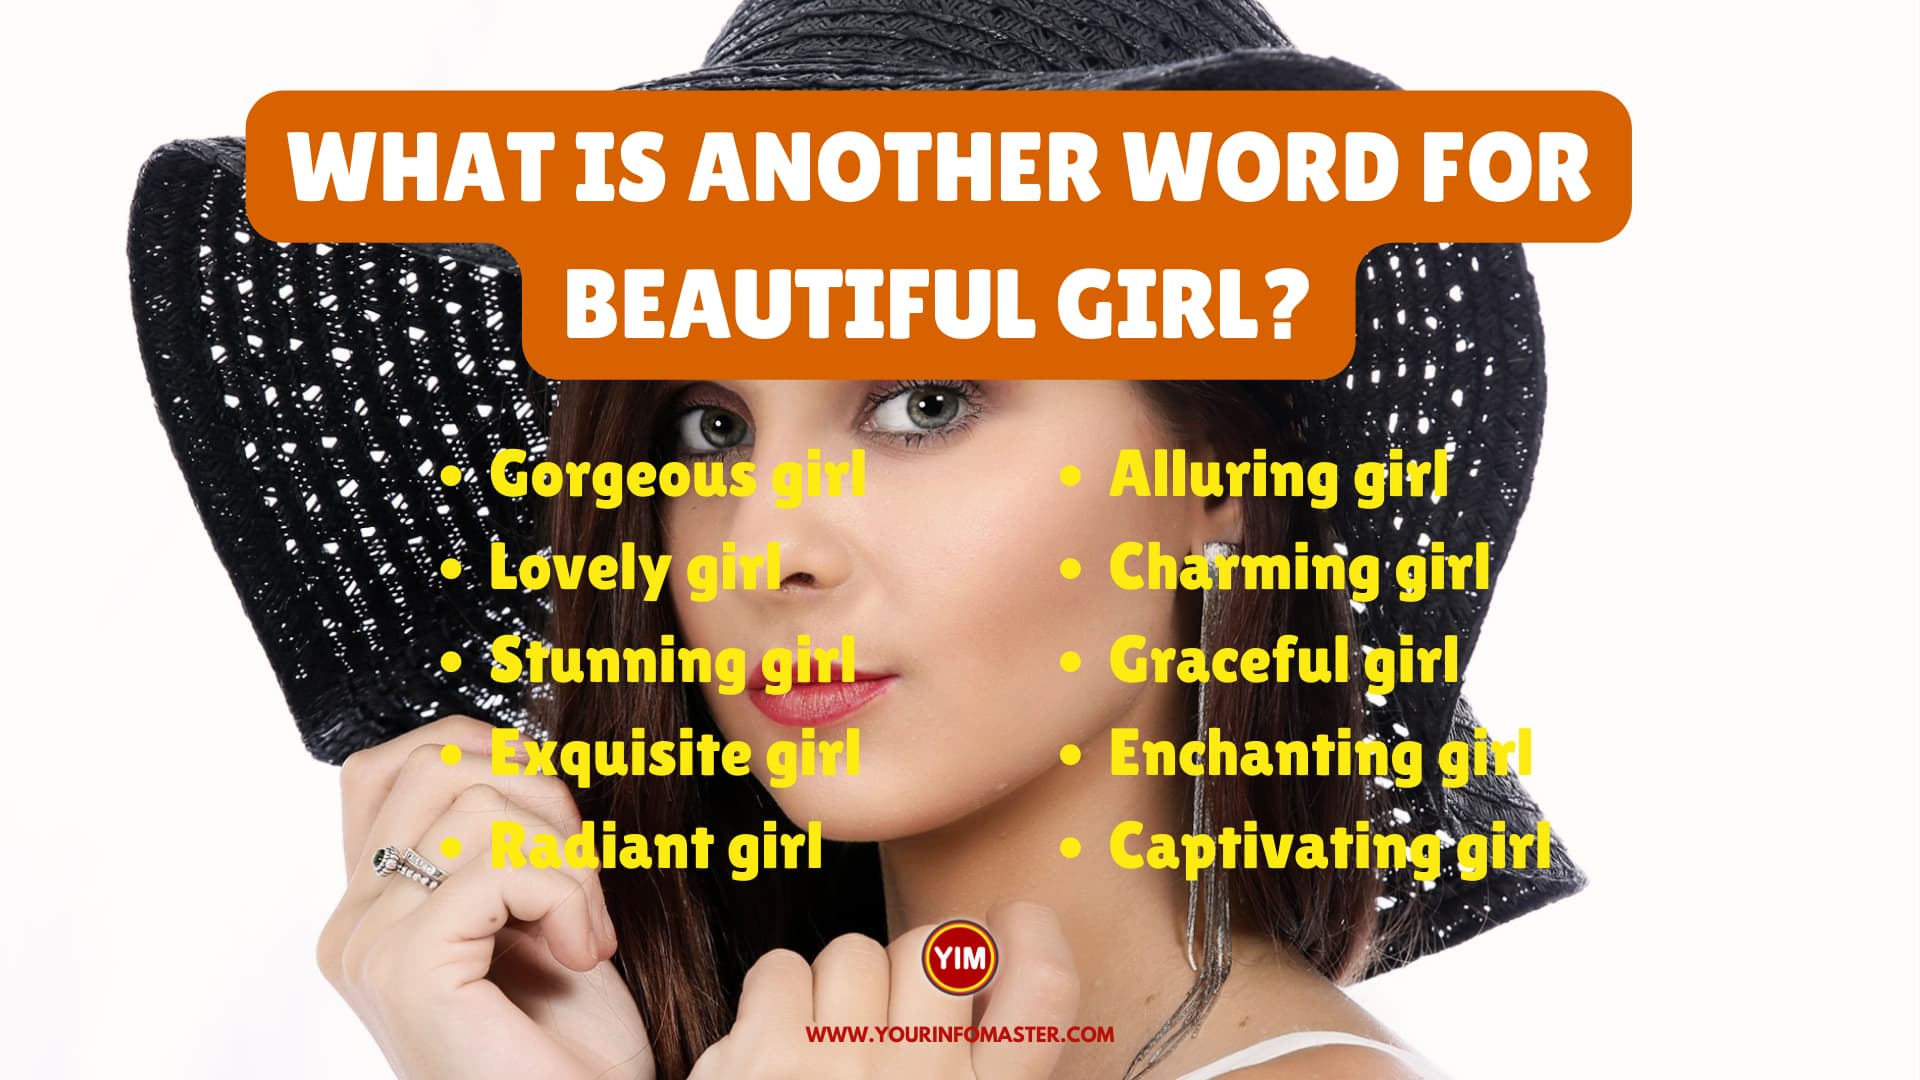 What is another word for Beautiful Girl